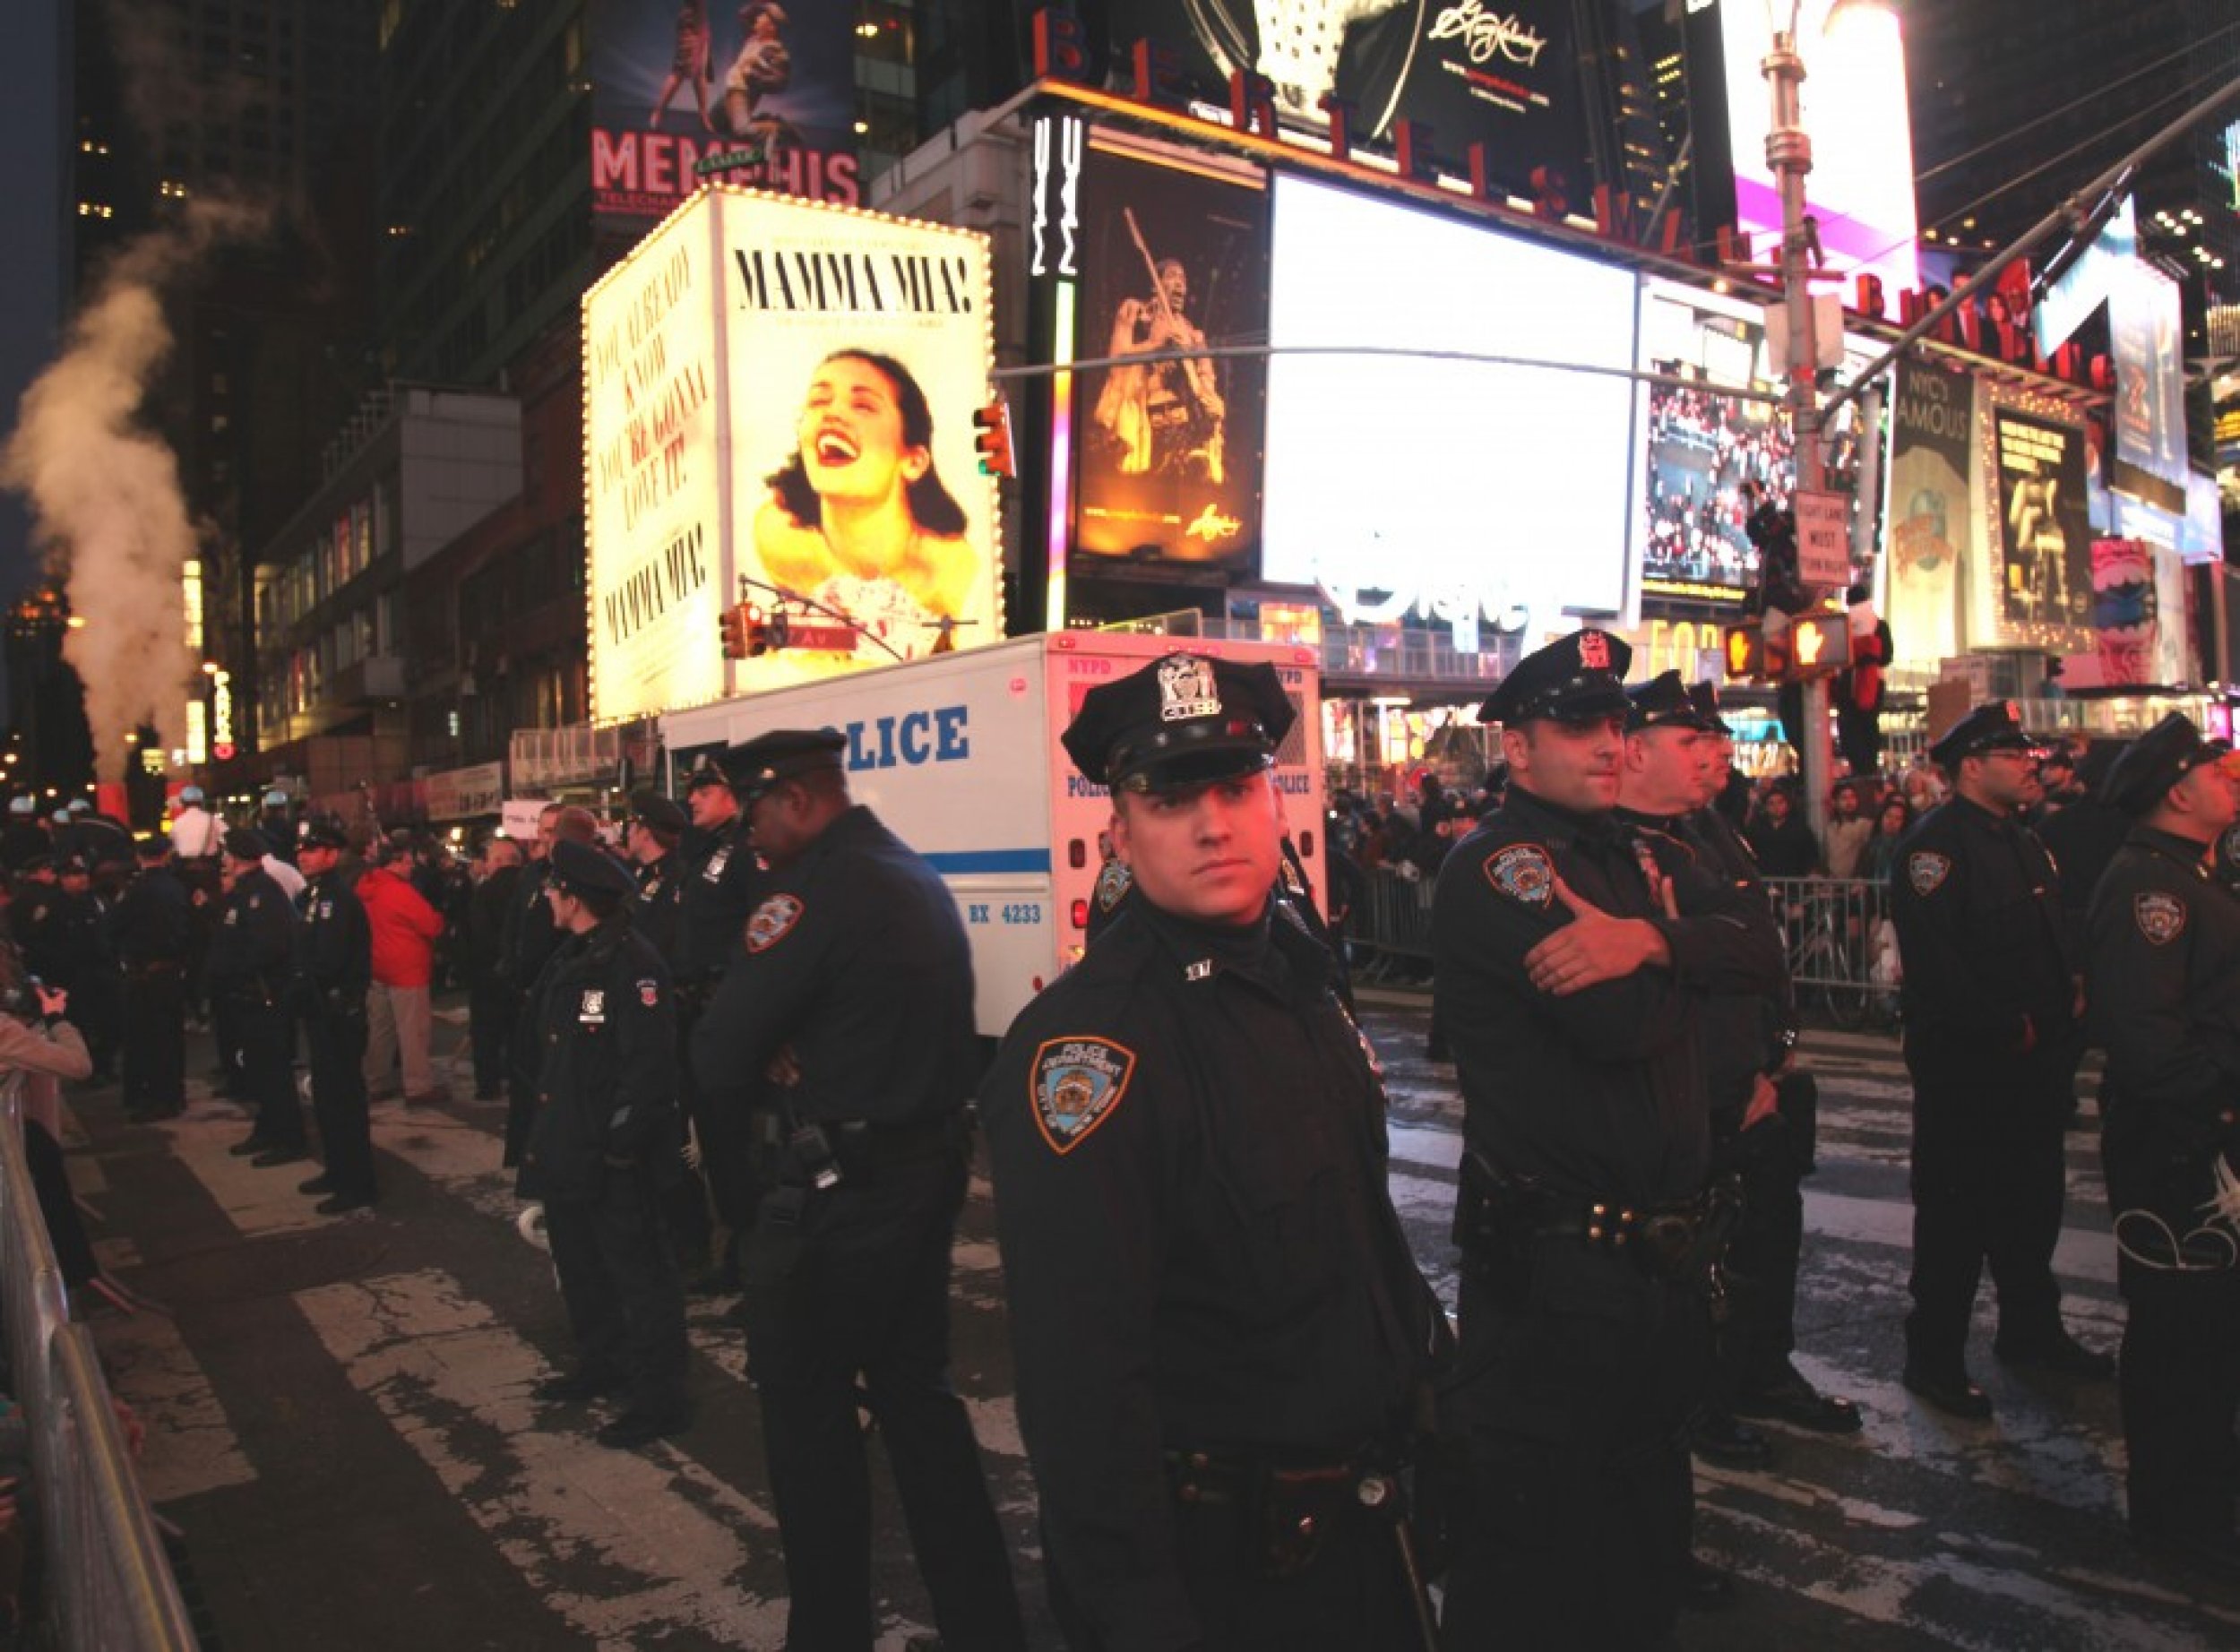 Officers and paddy wagon in Times Square